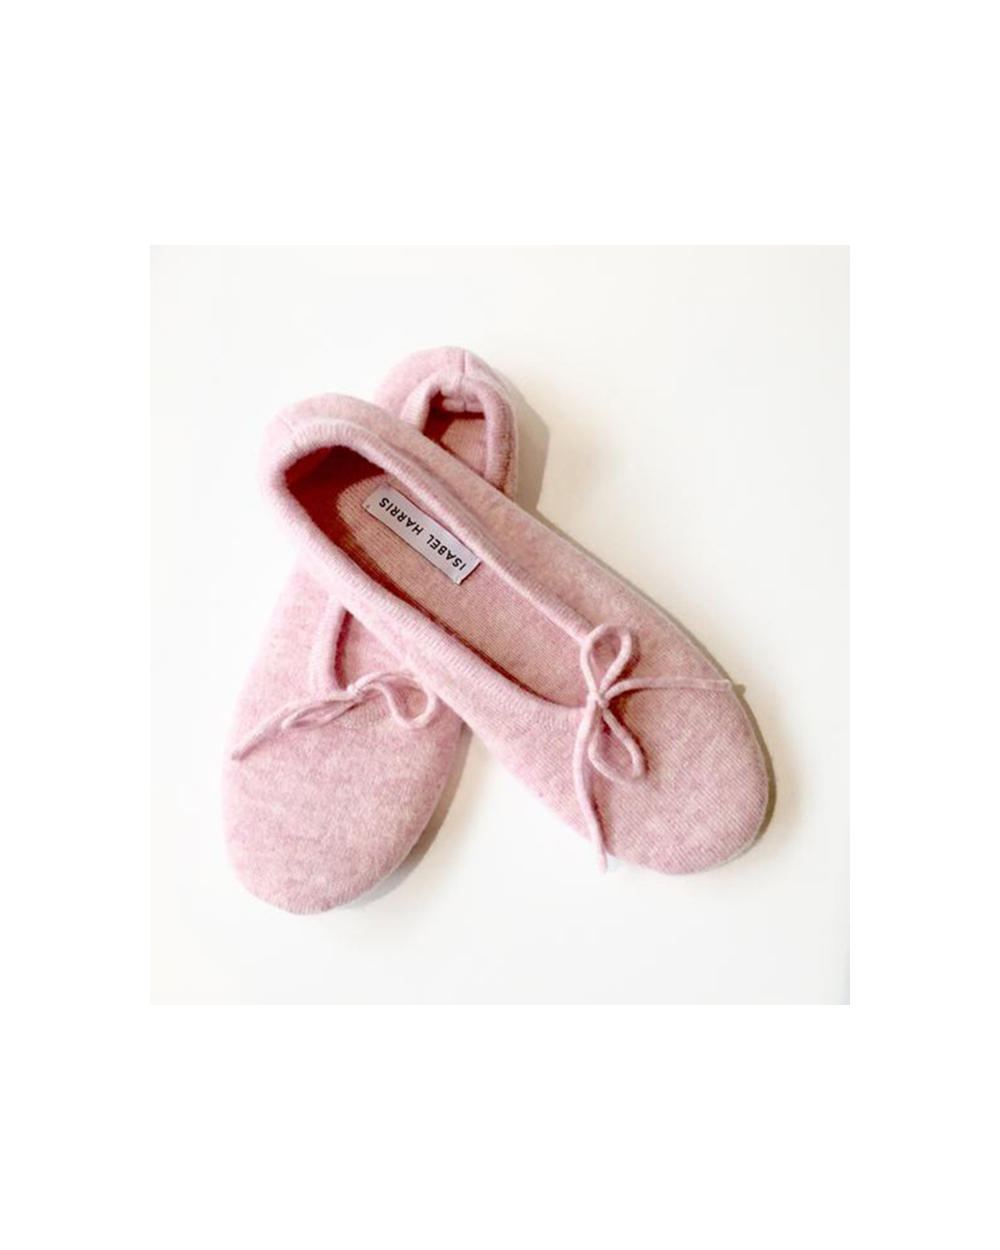 Isabel Harris cashmere slippers, $119